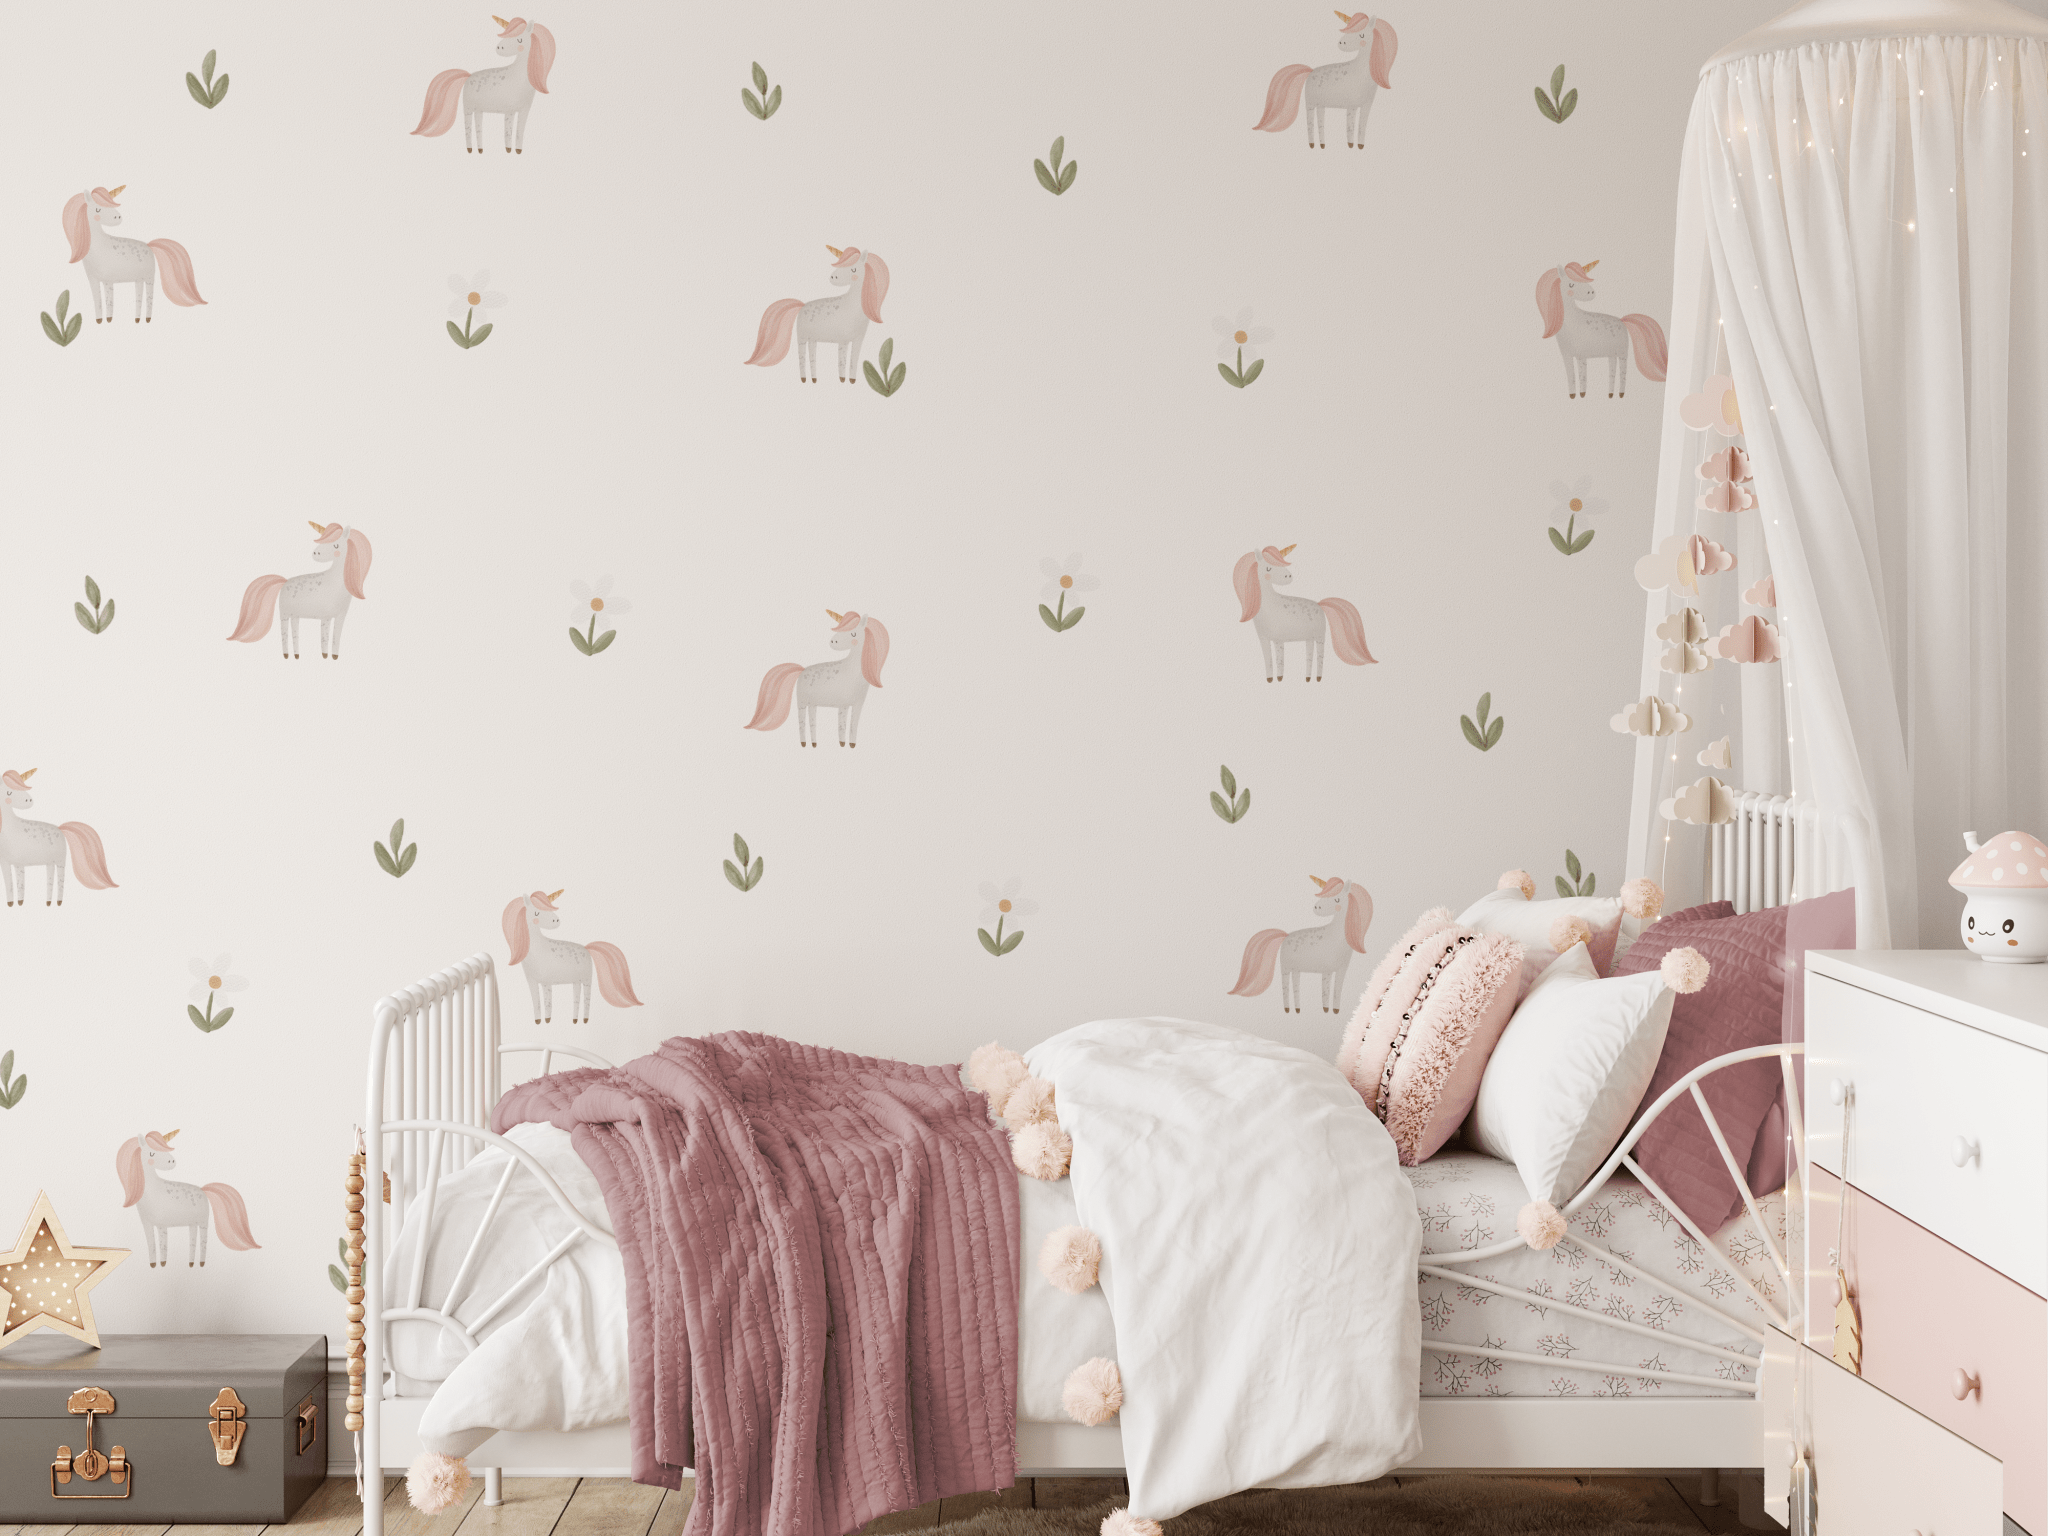 Beautiful girls bedroom with dusty rose decor and unicorn and flower removable wall stickers